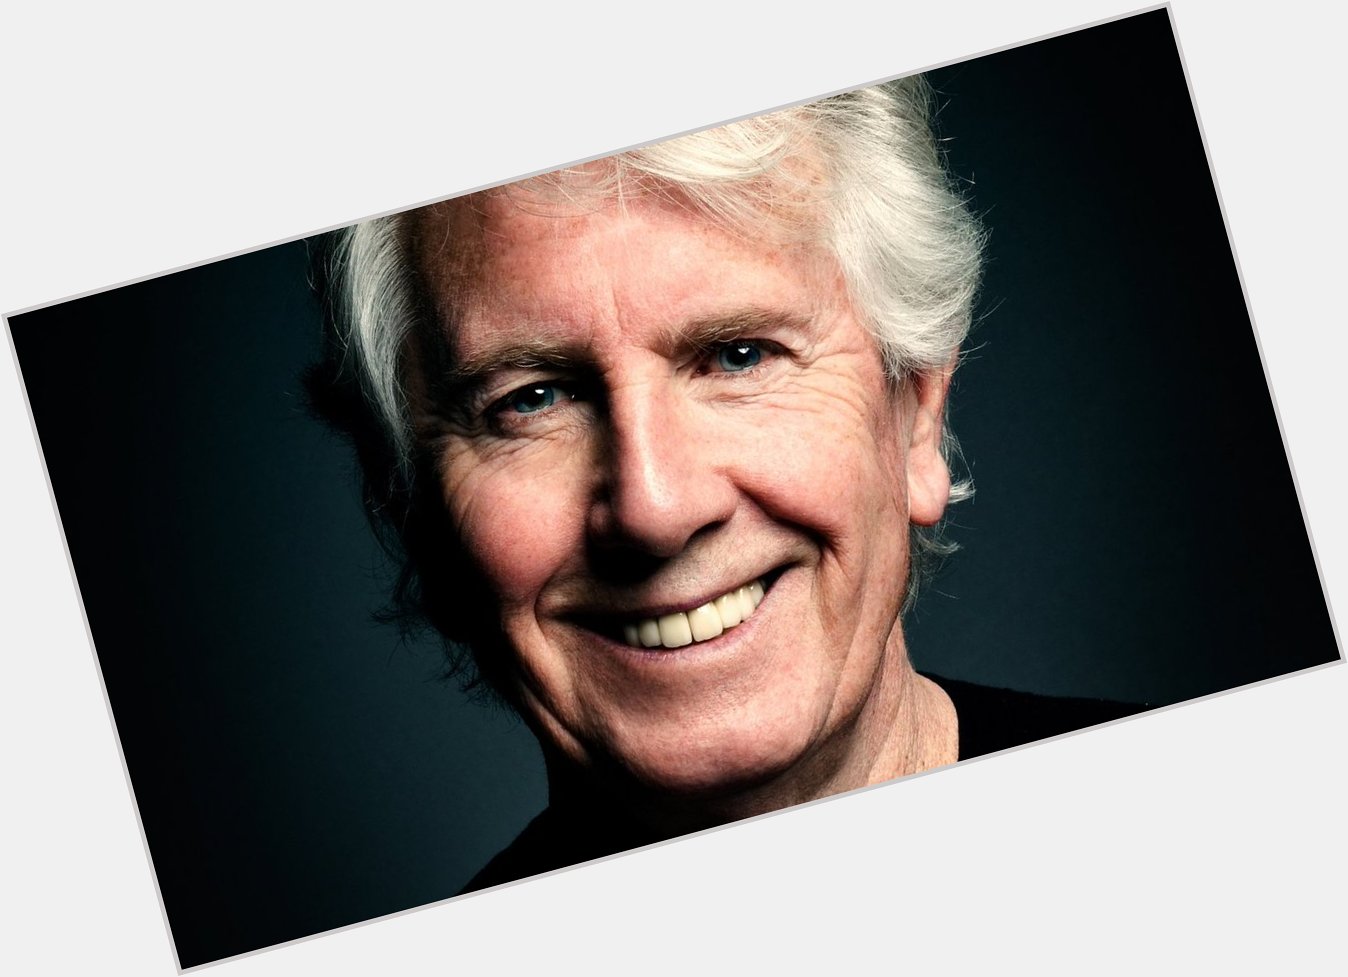 A Big BOSS Happy Birthday today to Graham Nash from all of us here at The Boss! 